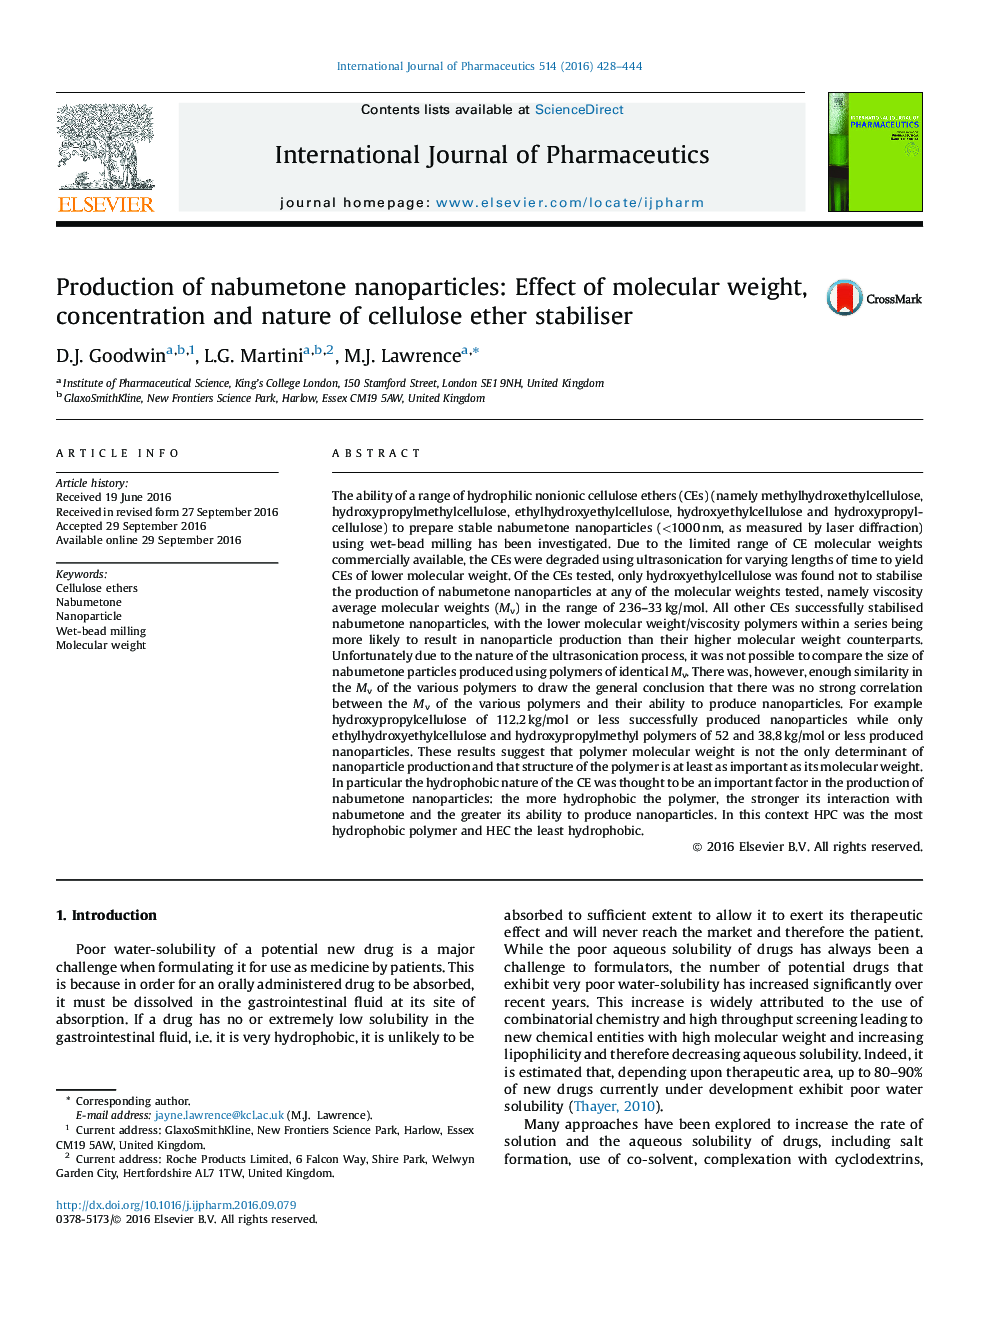 Production of nabumetone nanoparticles: Effect of molecular weight, concentration and nature of cellulose ether stabiliser